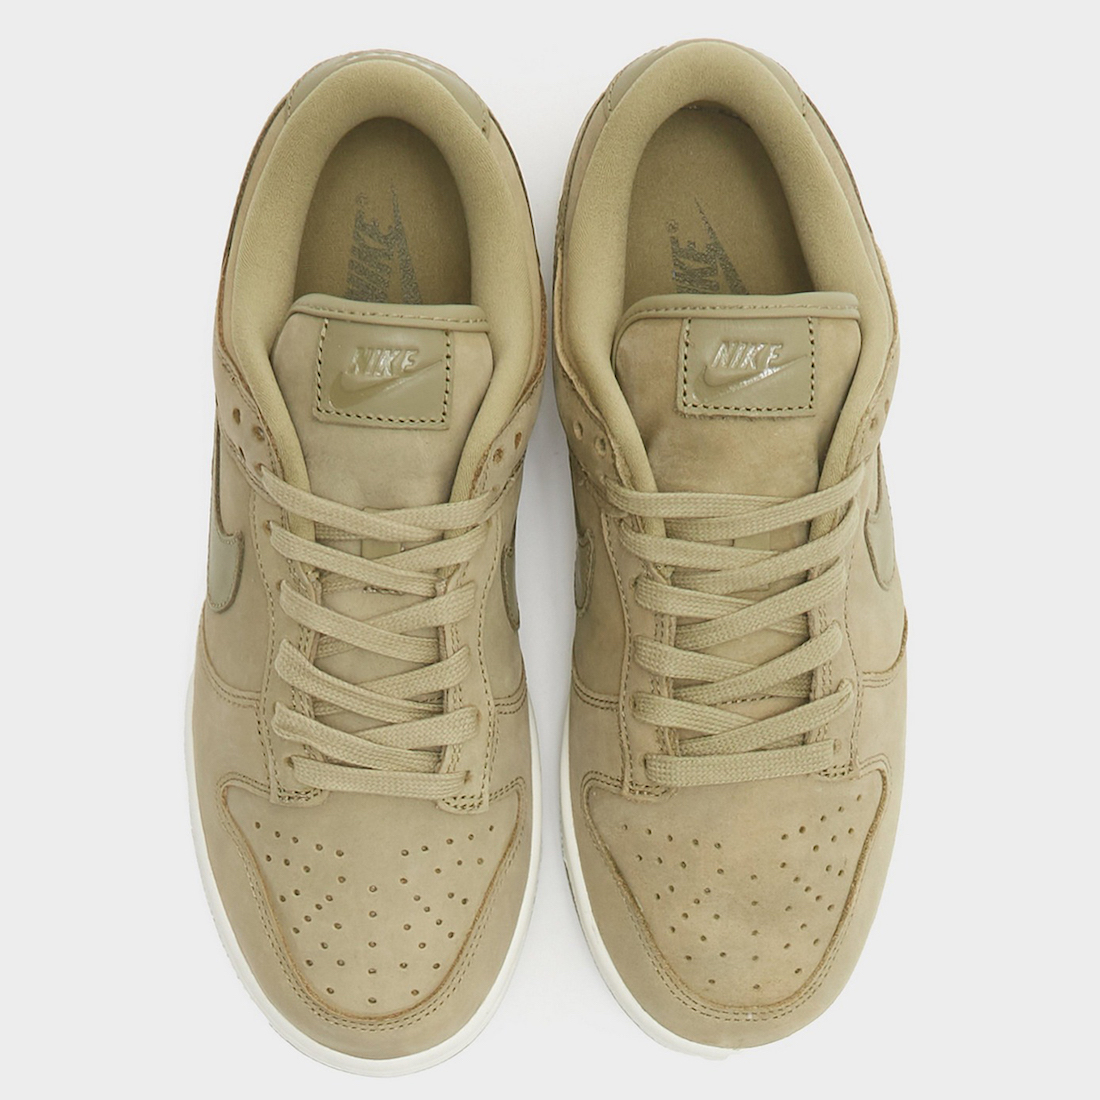 Nike dress Dunk Low Neutral Olive Sail DV7415 200 Release Date 2